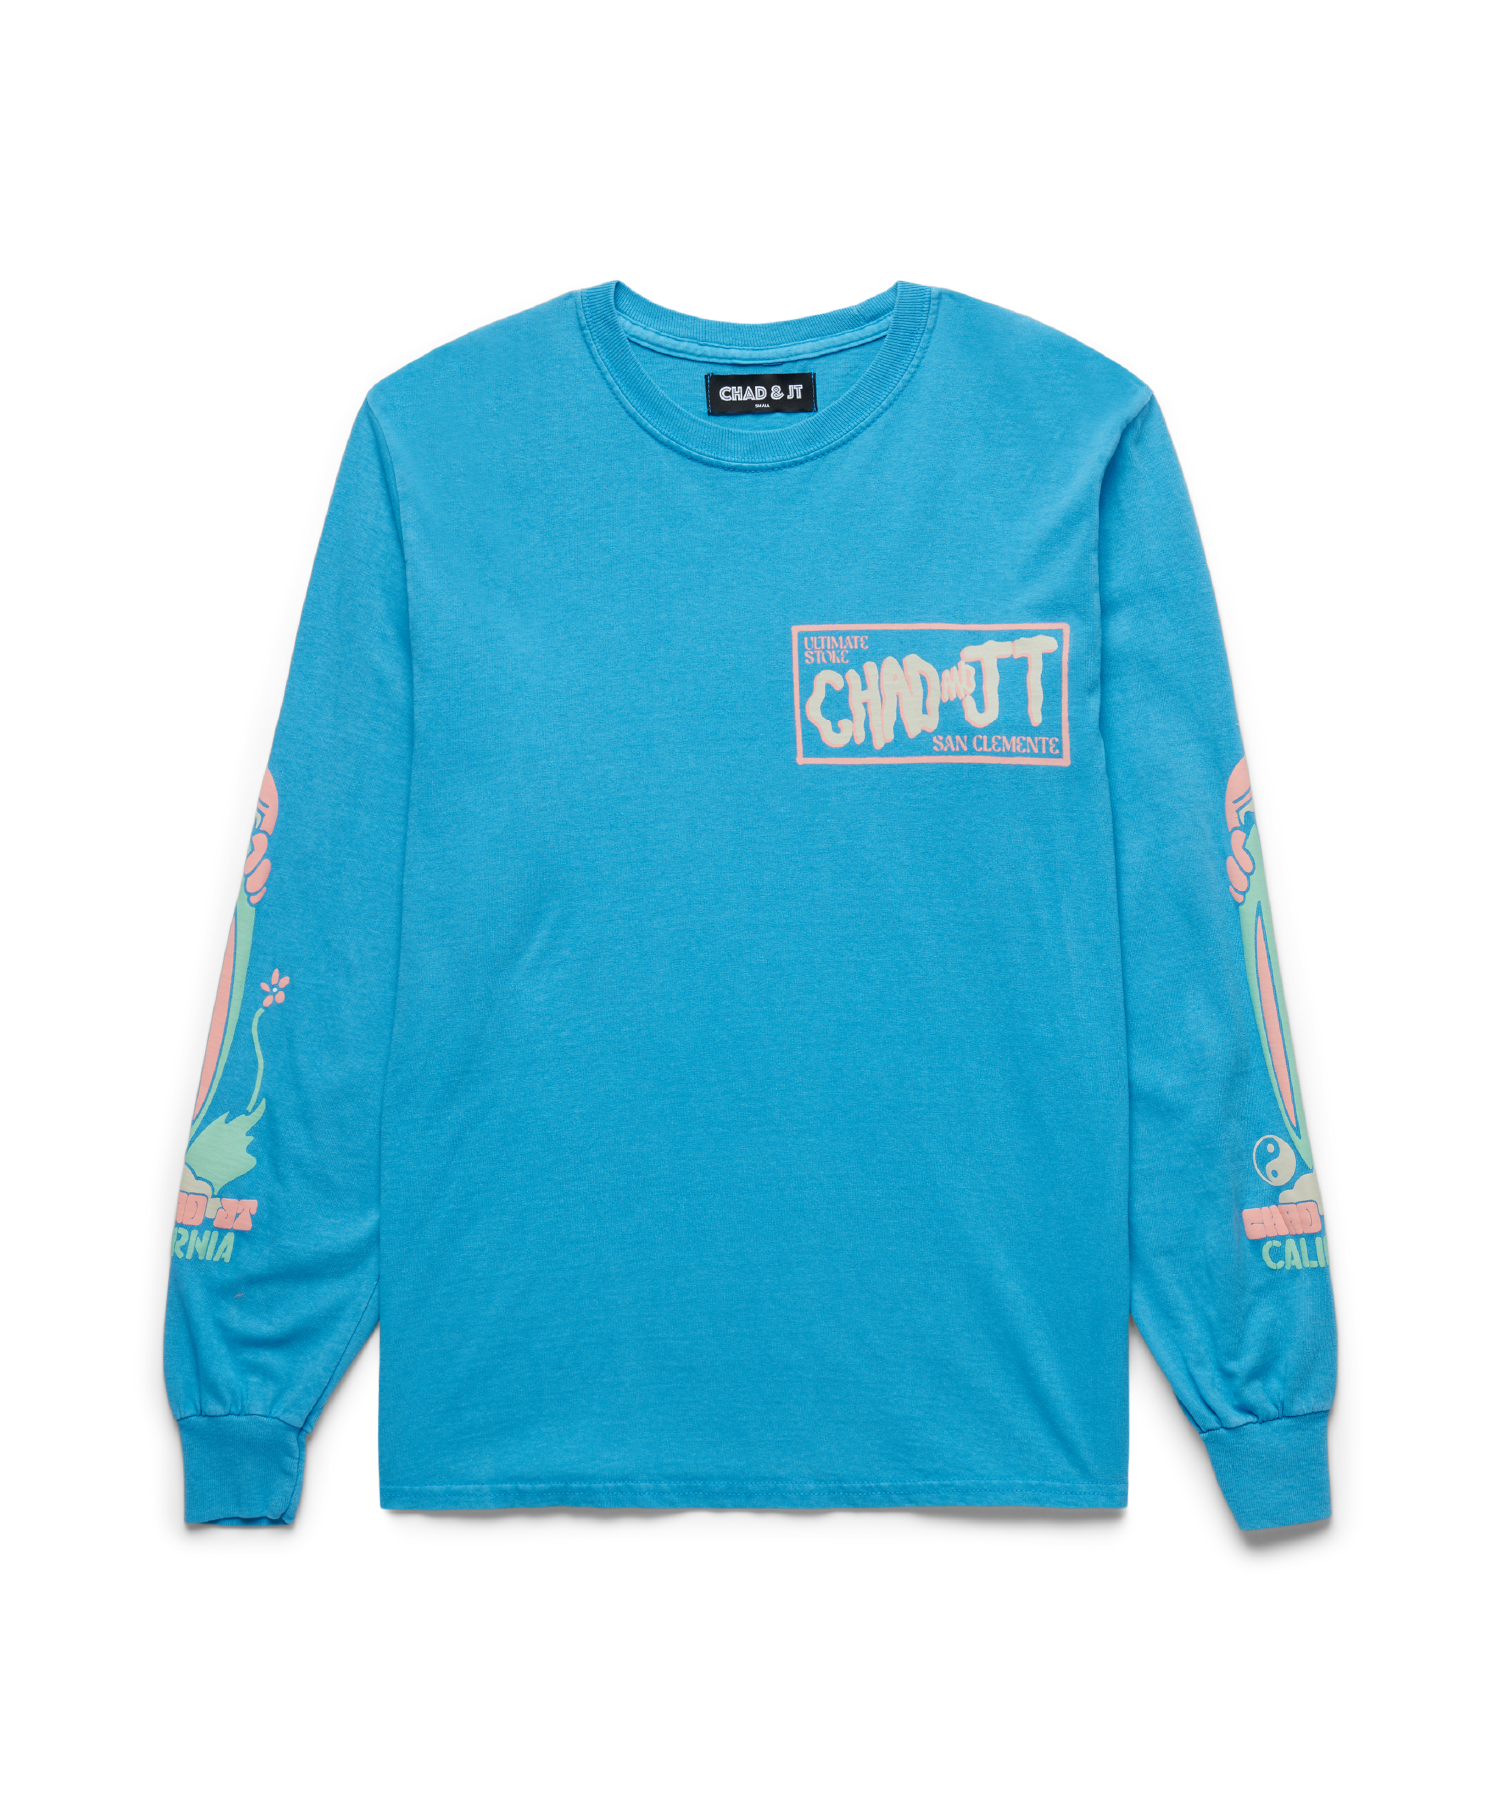 Locals Only - Longsleeve Tee - Pacific